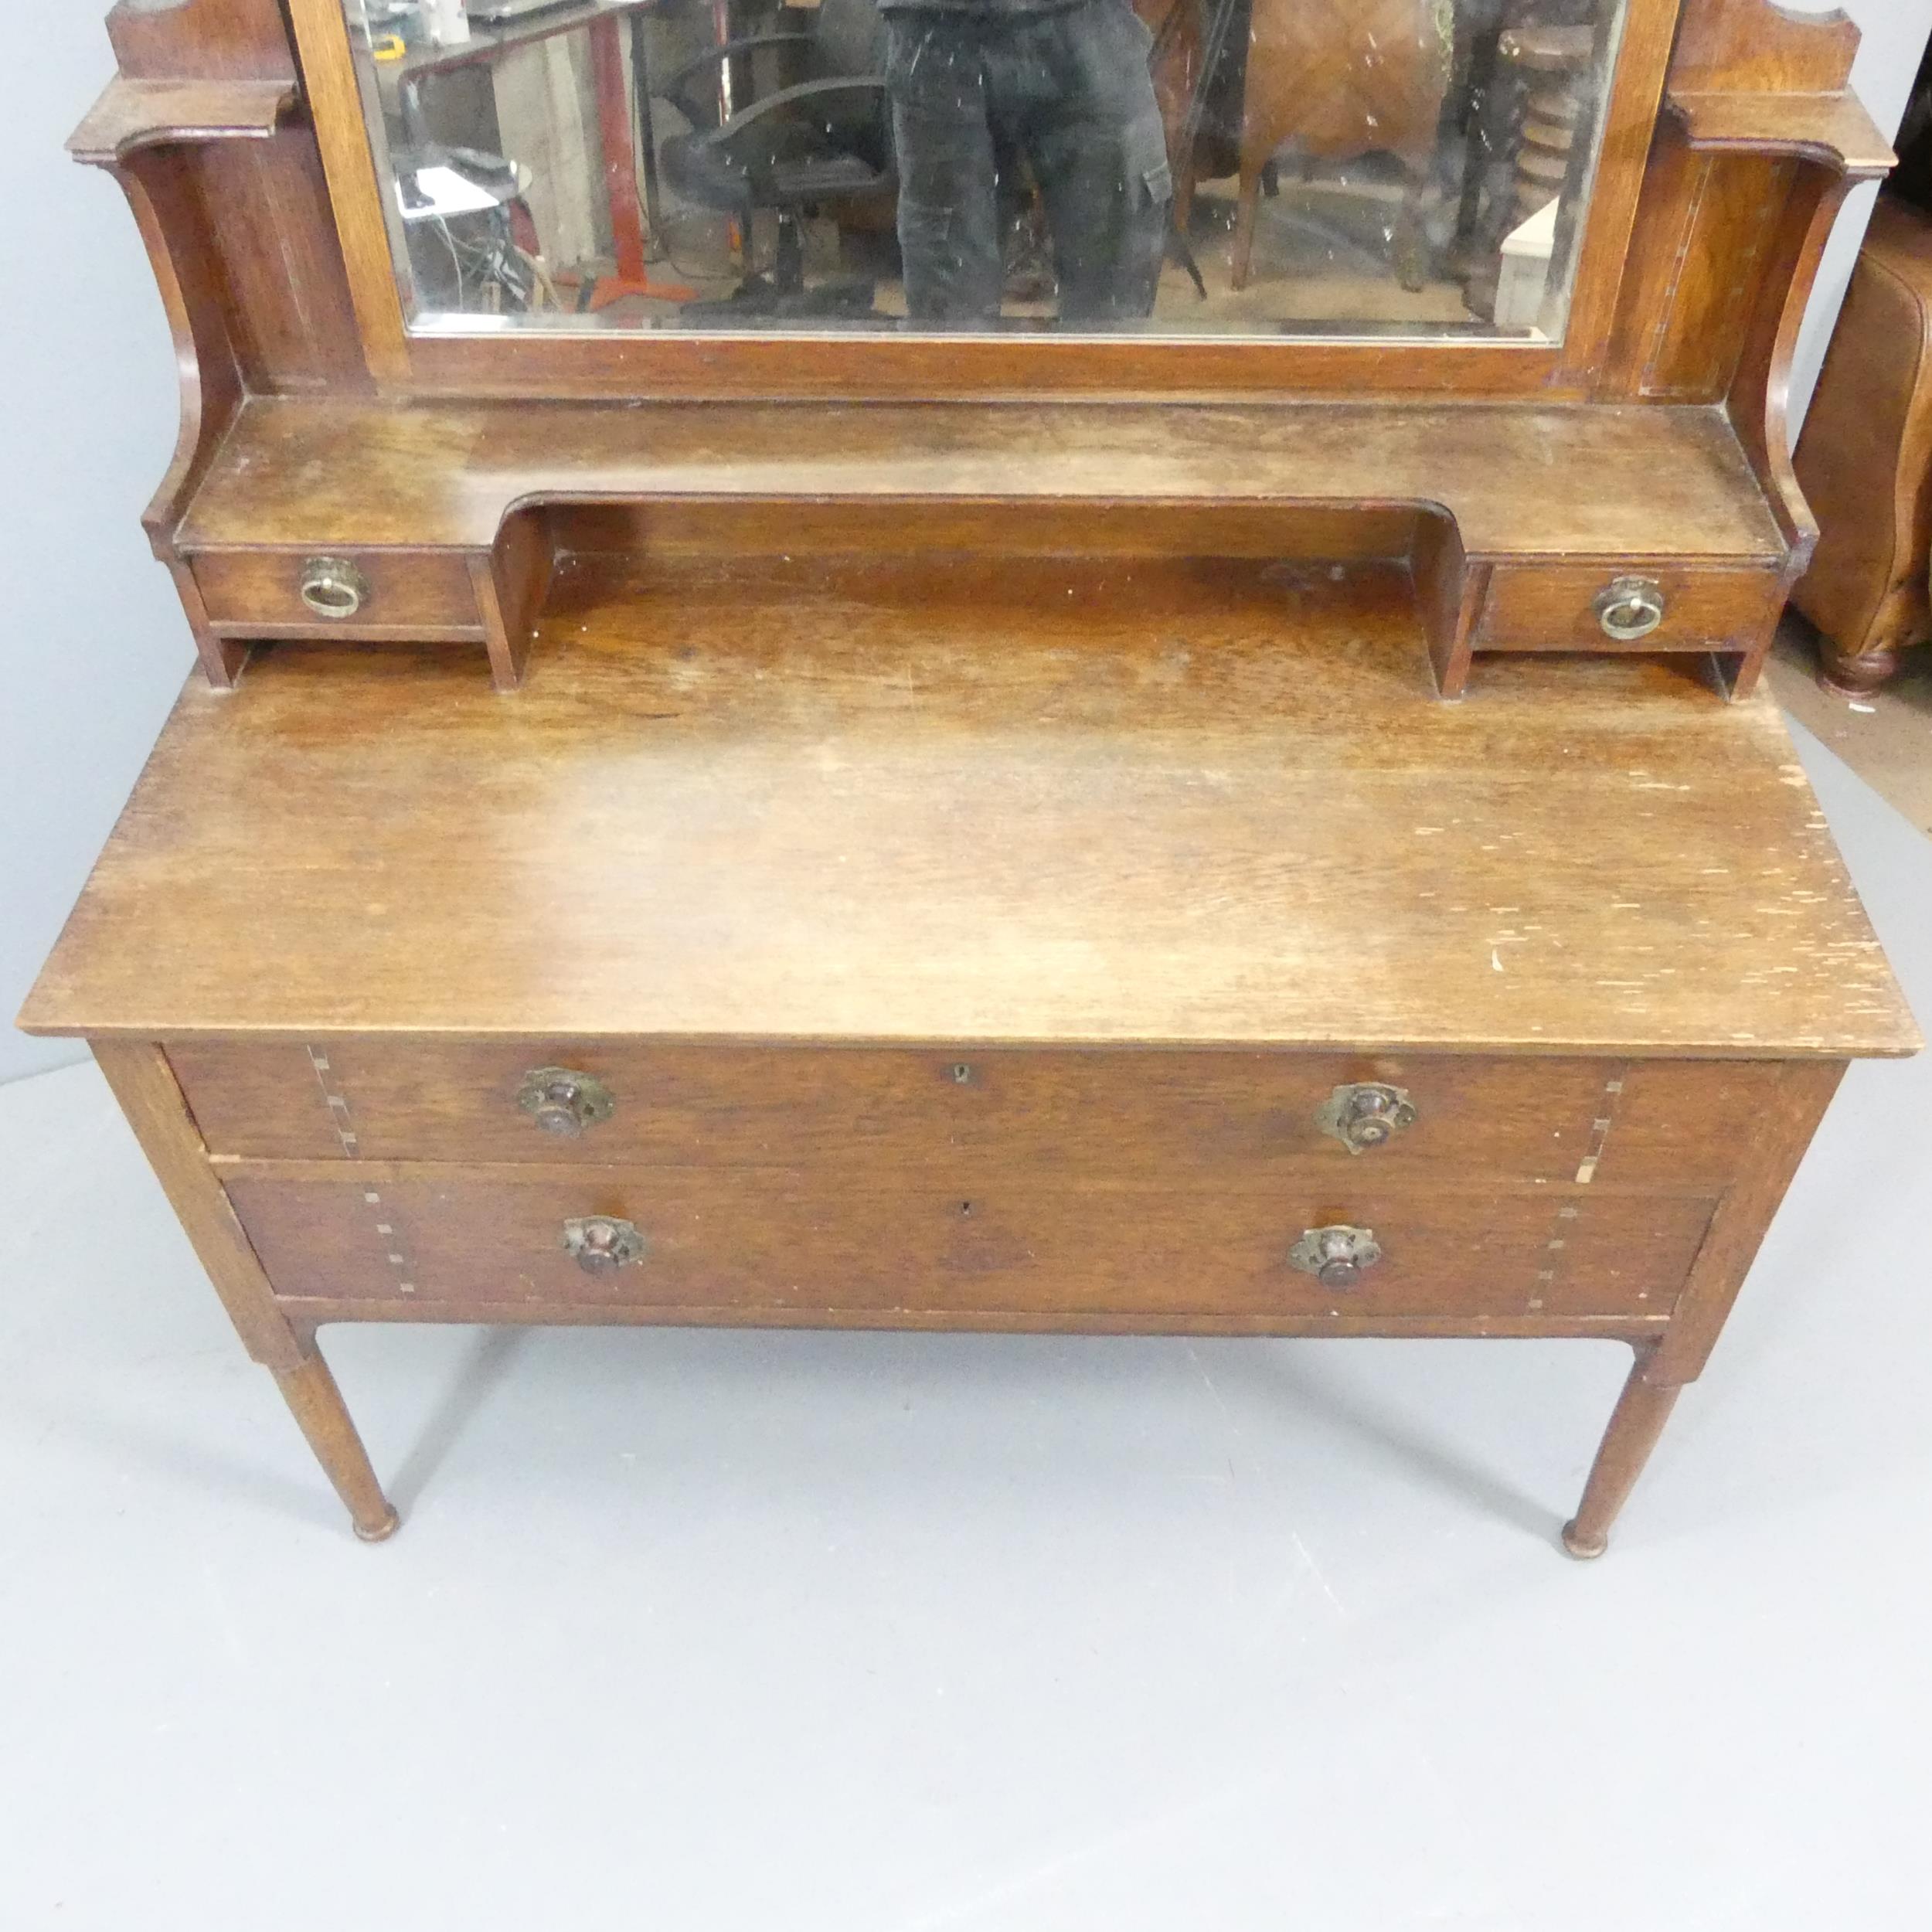 WYLIE AND LOCHHEAD - An Arts and Crafts oak dressing table, possibly designed by John Ednie, with - Image 2 of 2